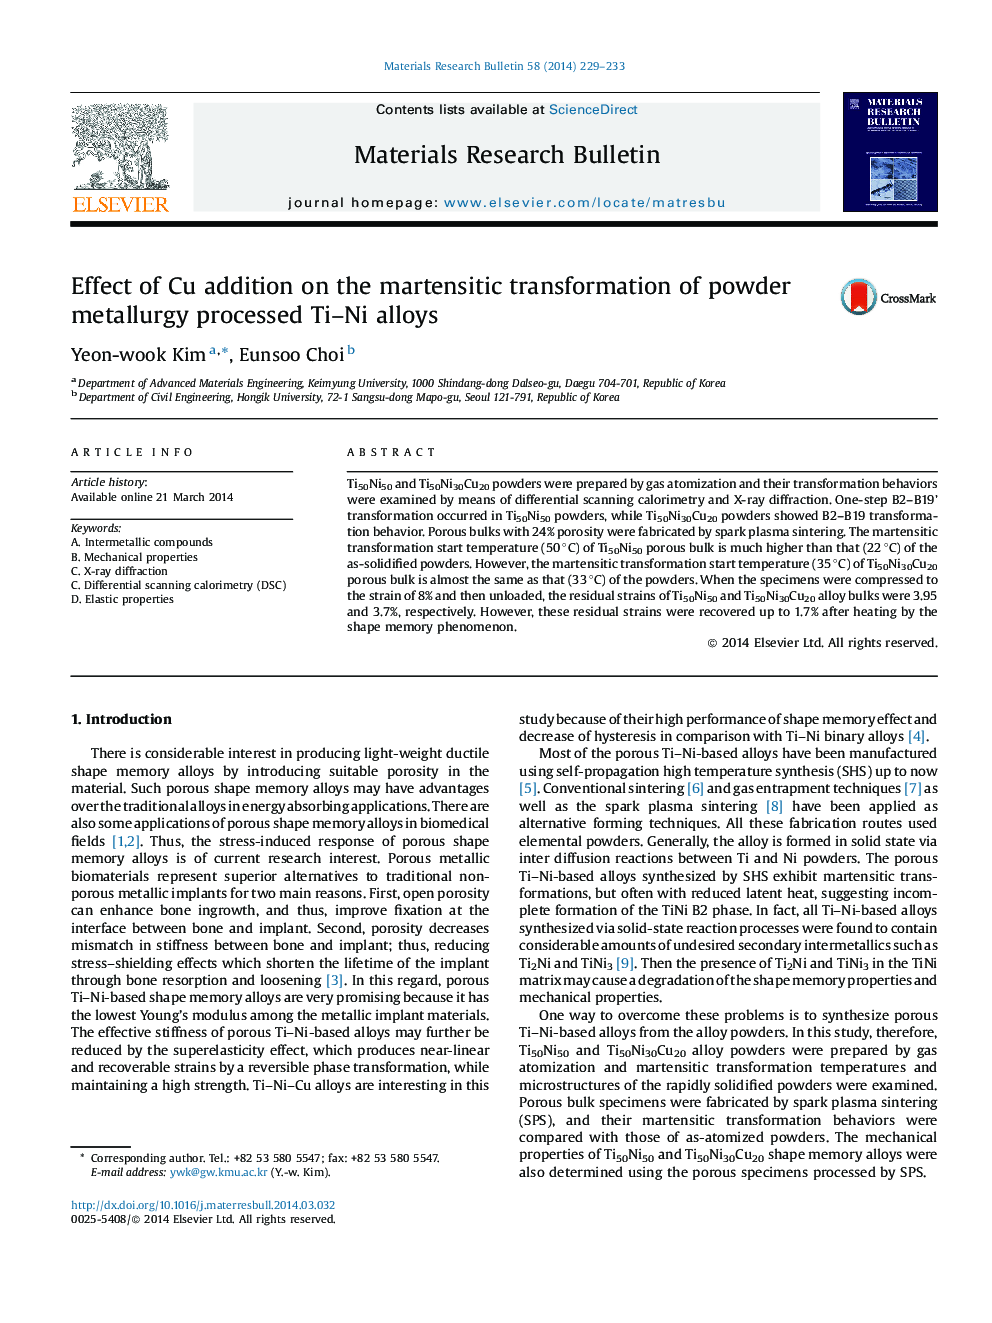 Effect of Cu addition on the martensitic transformation of powder metallurgy processed Ti-Ni alloys